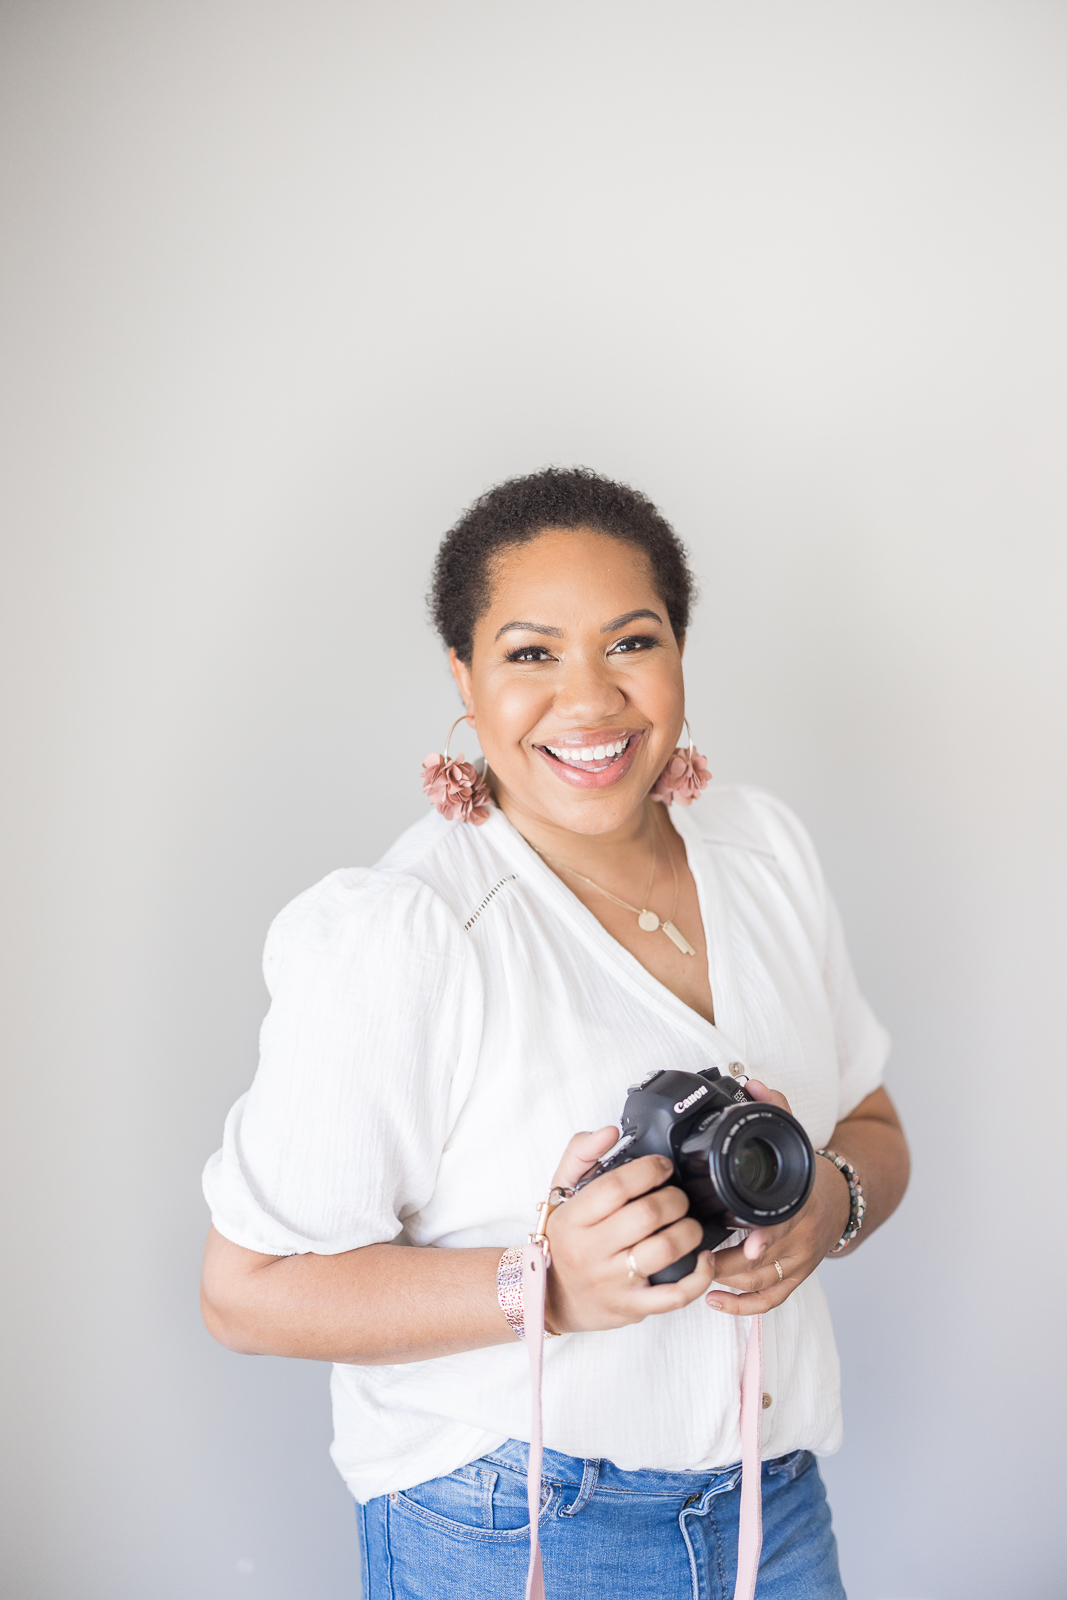  Woman holding a camera, and smiling during her branding photography session.
